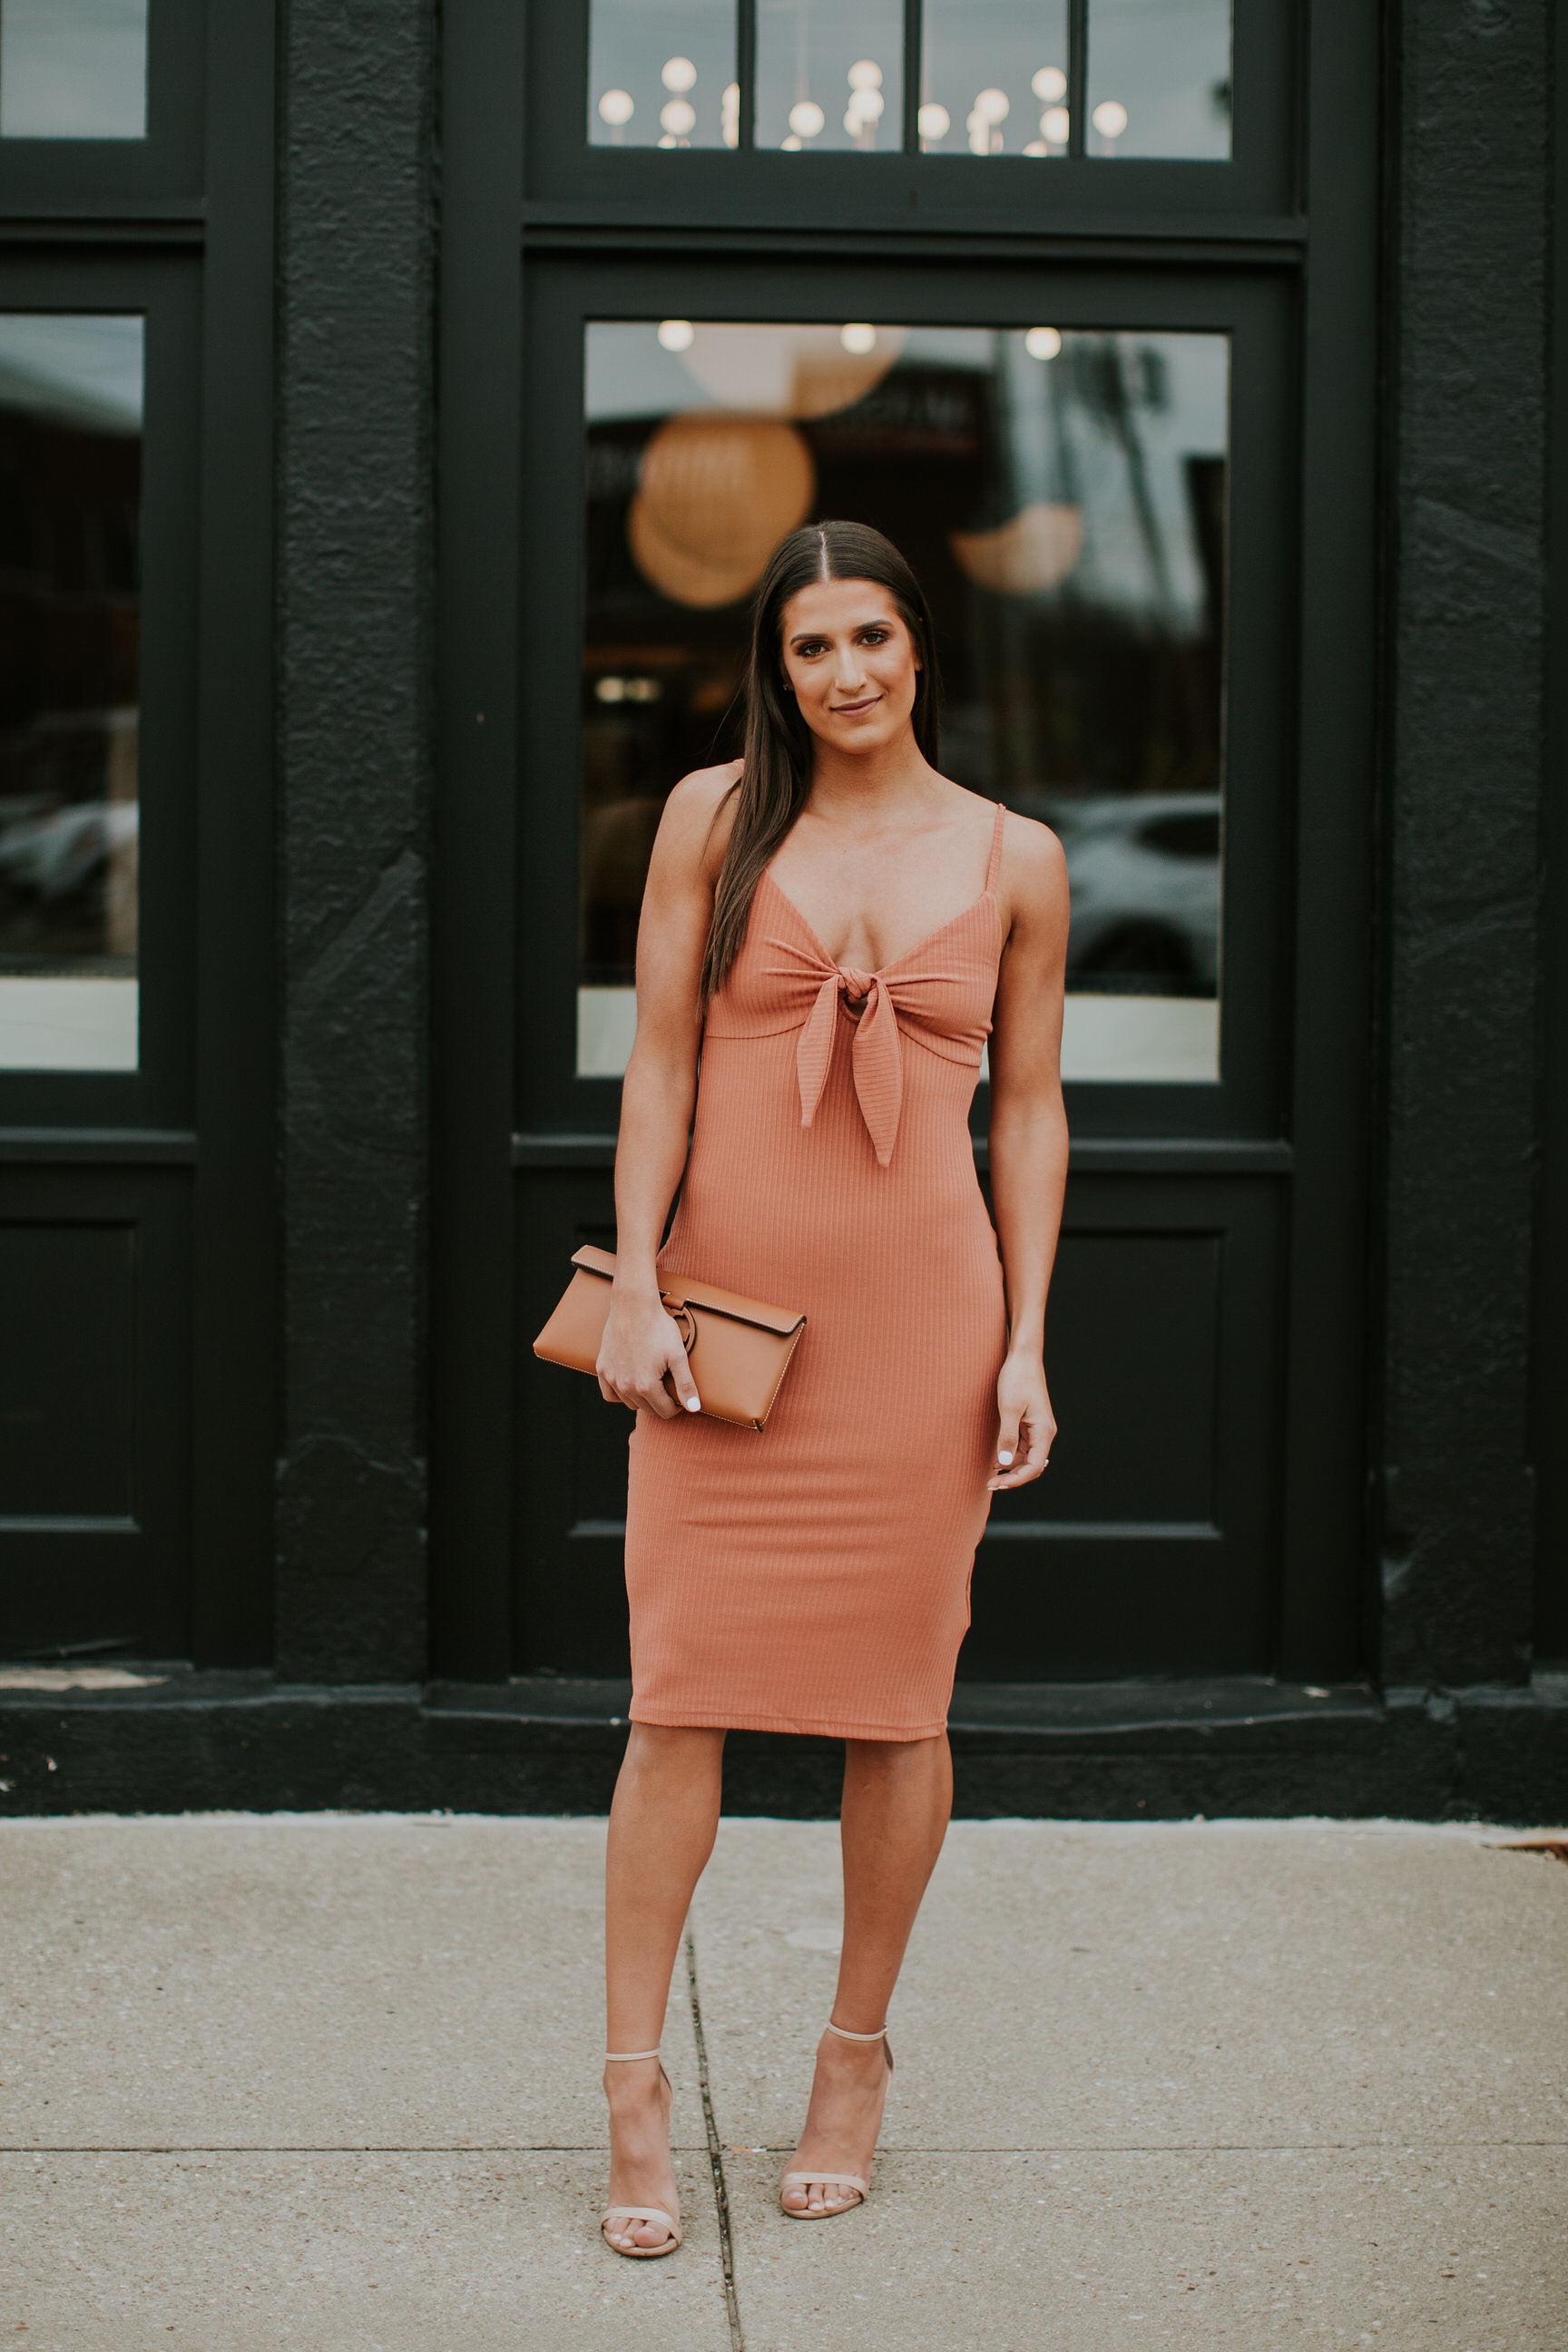 affordable cocktail dress, affordable dresses, affordable midi dress, affordable summer dress, wedding guest dresses, minnkpink dresses, minkpink dress // grace wainwright a southern drawl